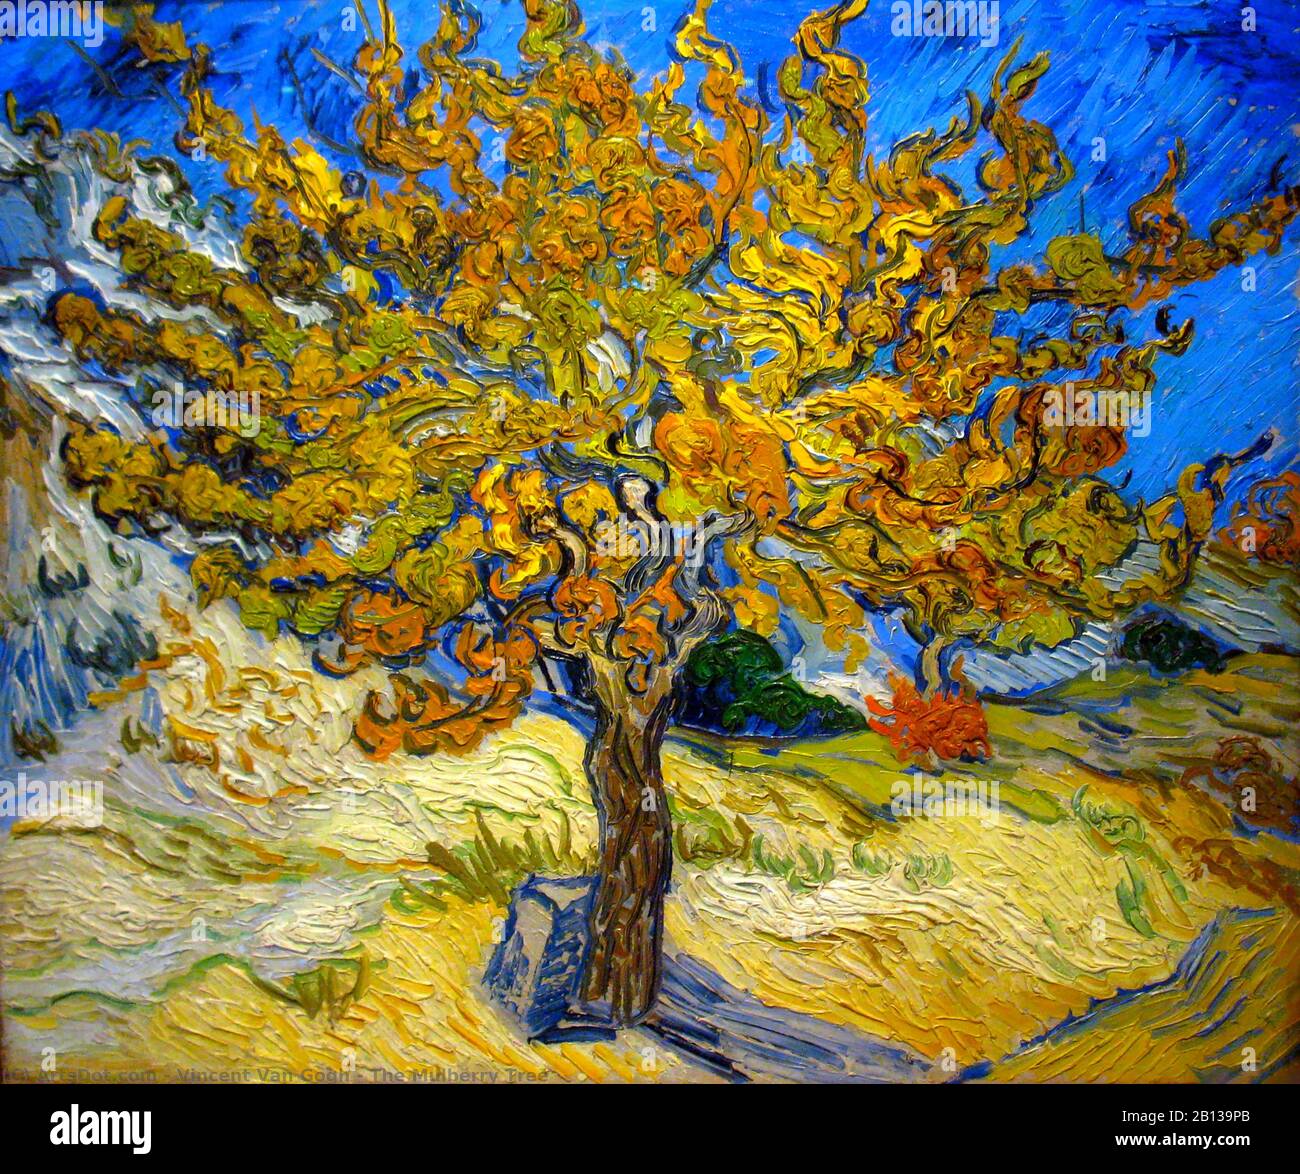 The Mulberry Tree painting by Vincent van Gogh - Very high resolution and quality image Stock Photo